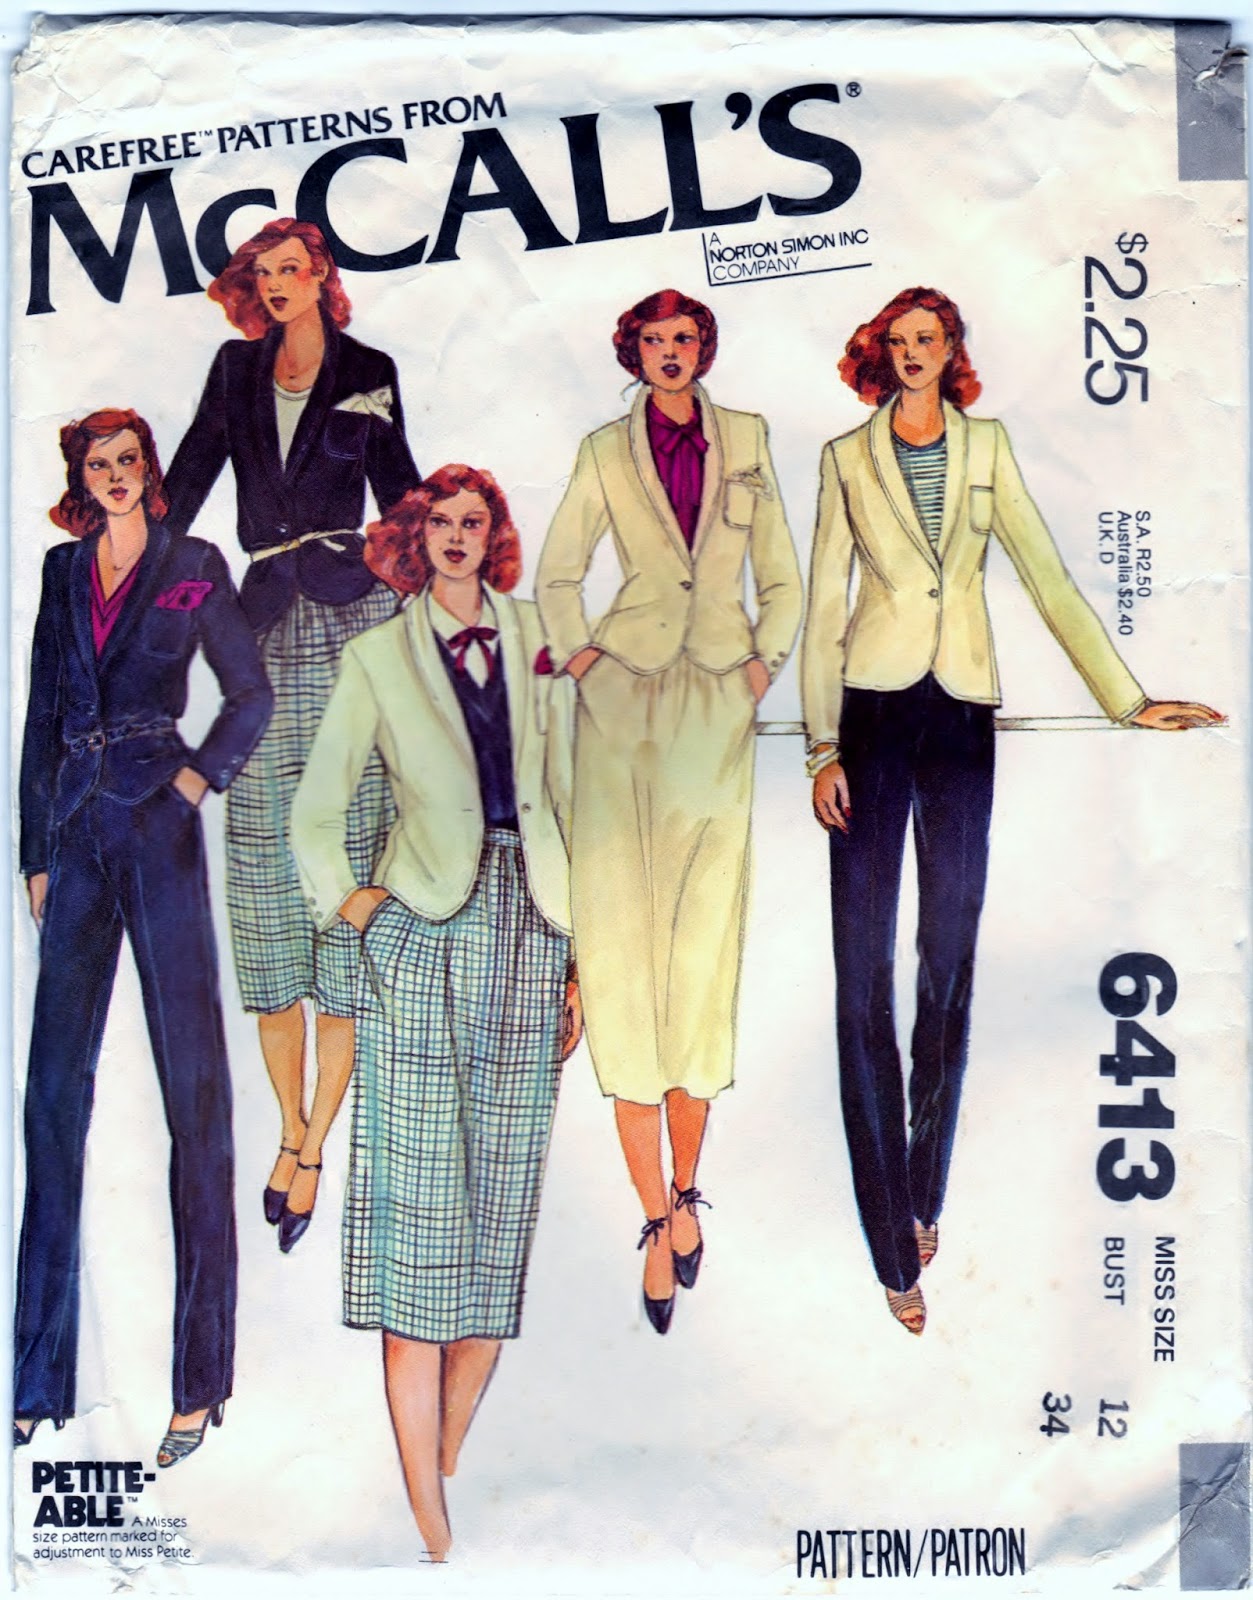 https://www.etsy.com/listing/221748826/mccalls-6413-sewing-craft-pattern-misses